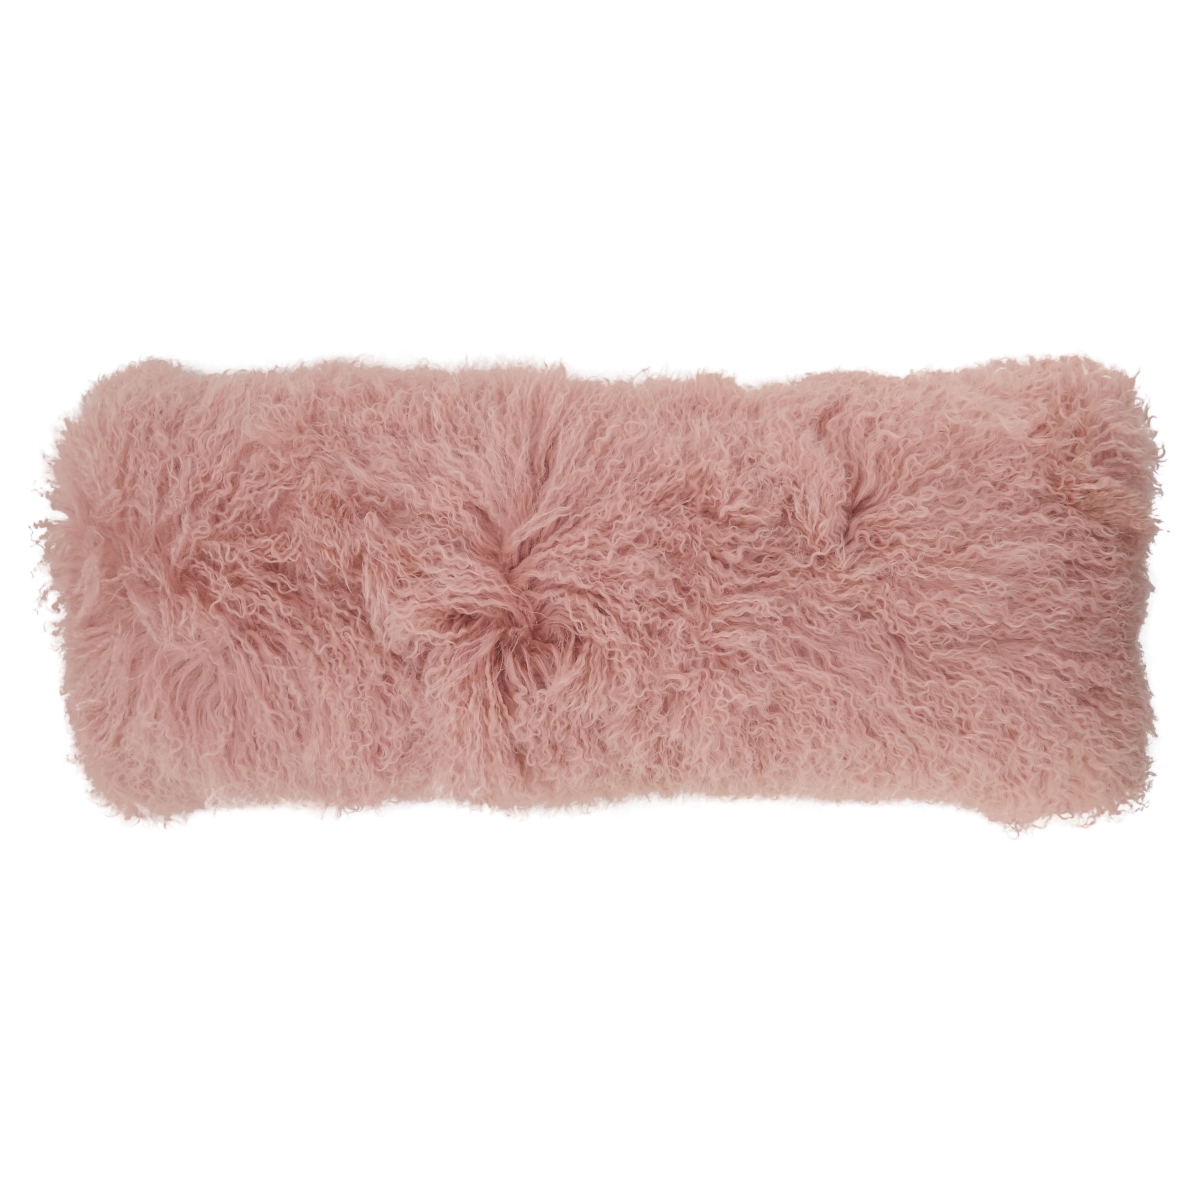 Picture of SARO 3564.RS1436B 14 x 36 in. Oblong Rose Mongolian Lamb Fur Throw Pillow with Poly Filling